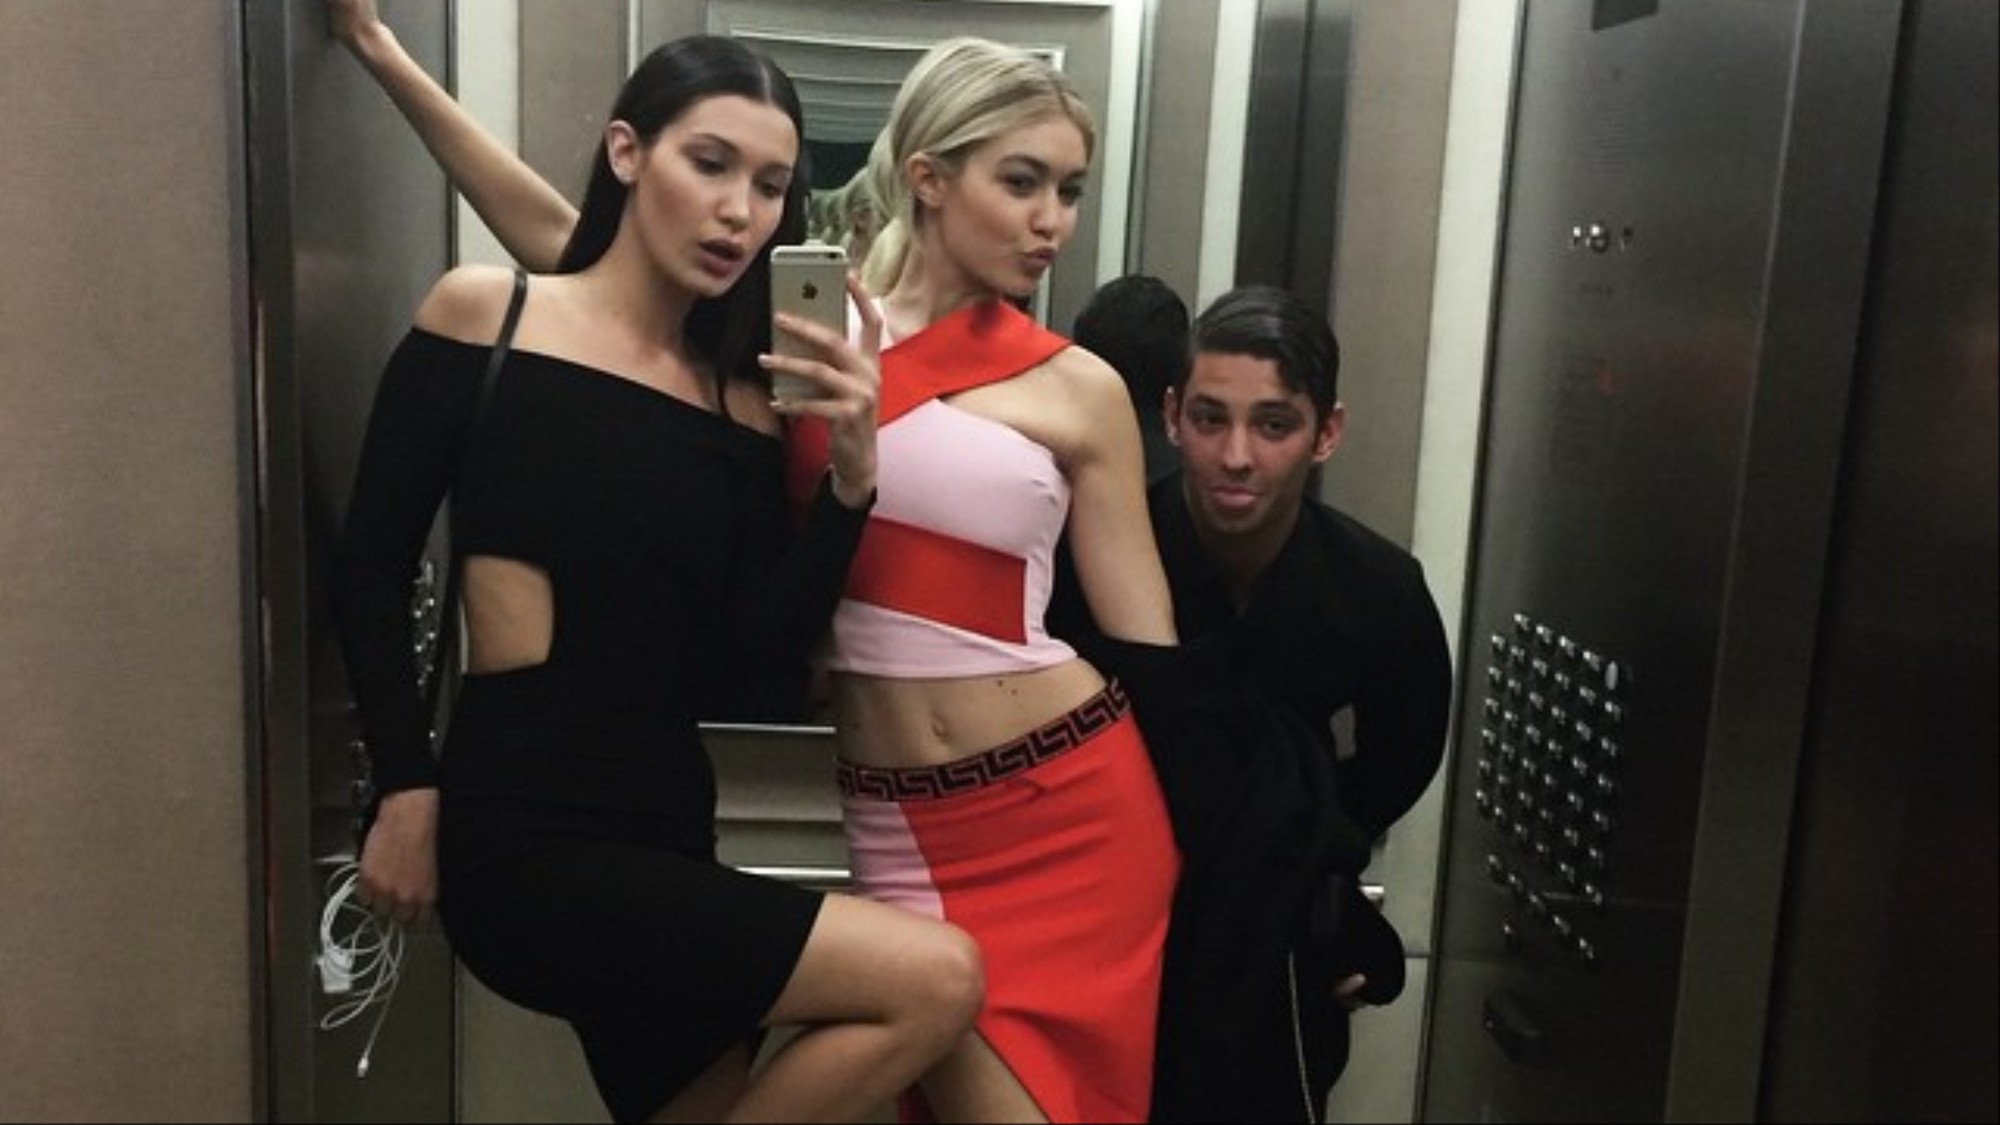 A Scientific Investigation Into Why Lift Selfies Are The